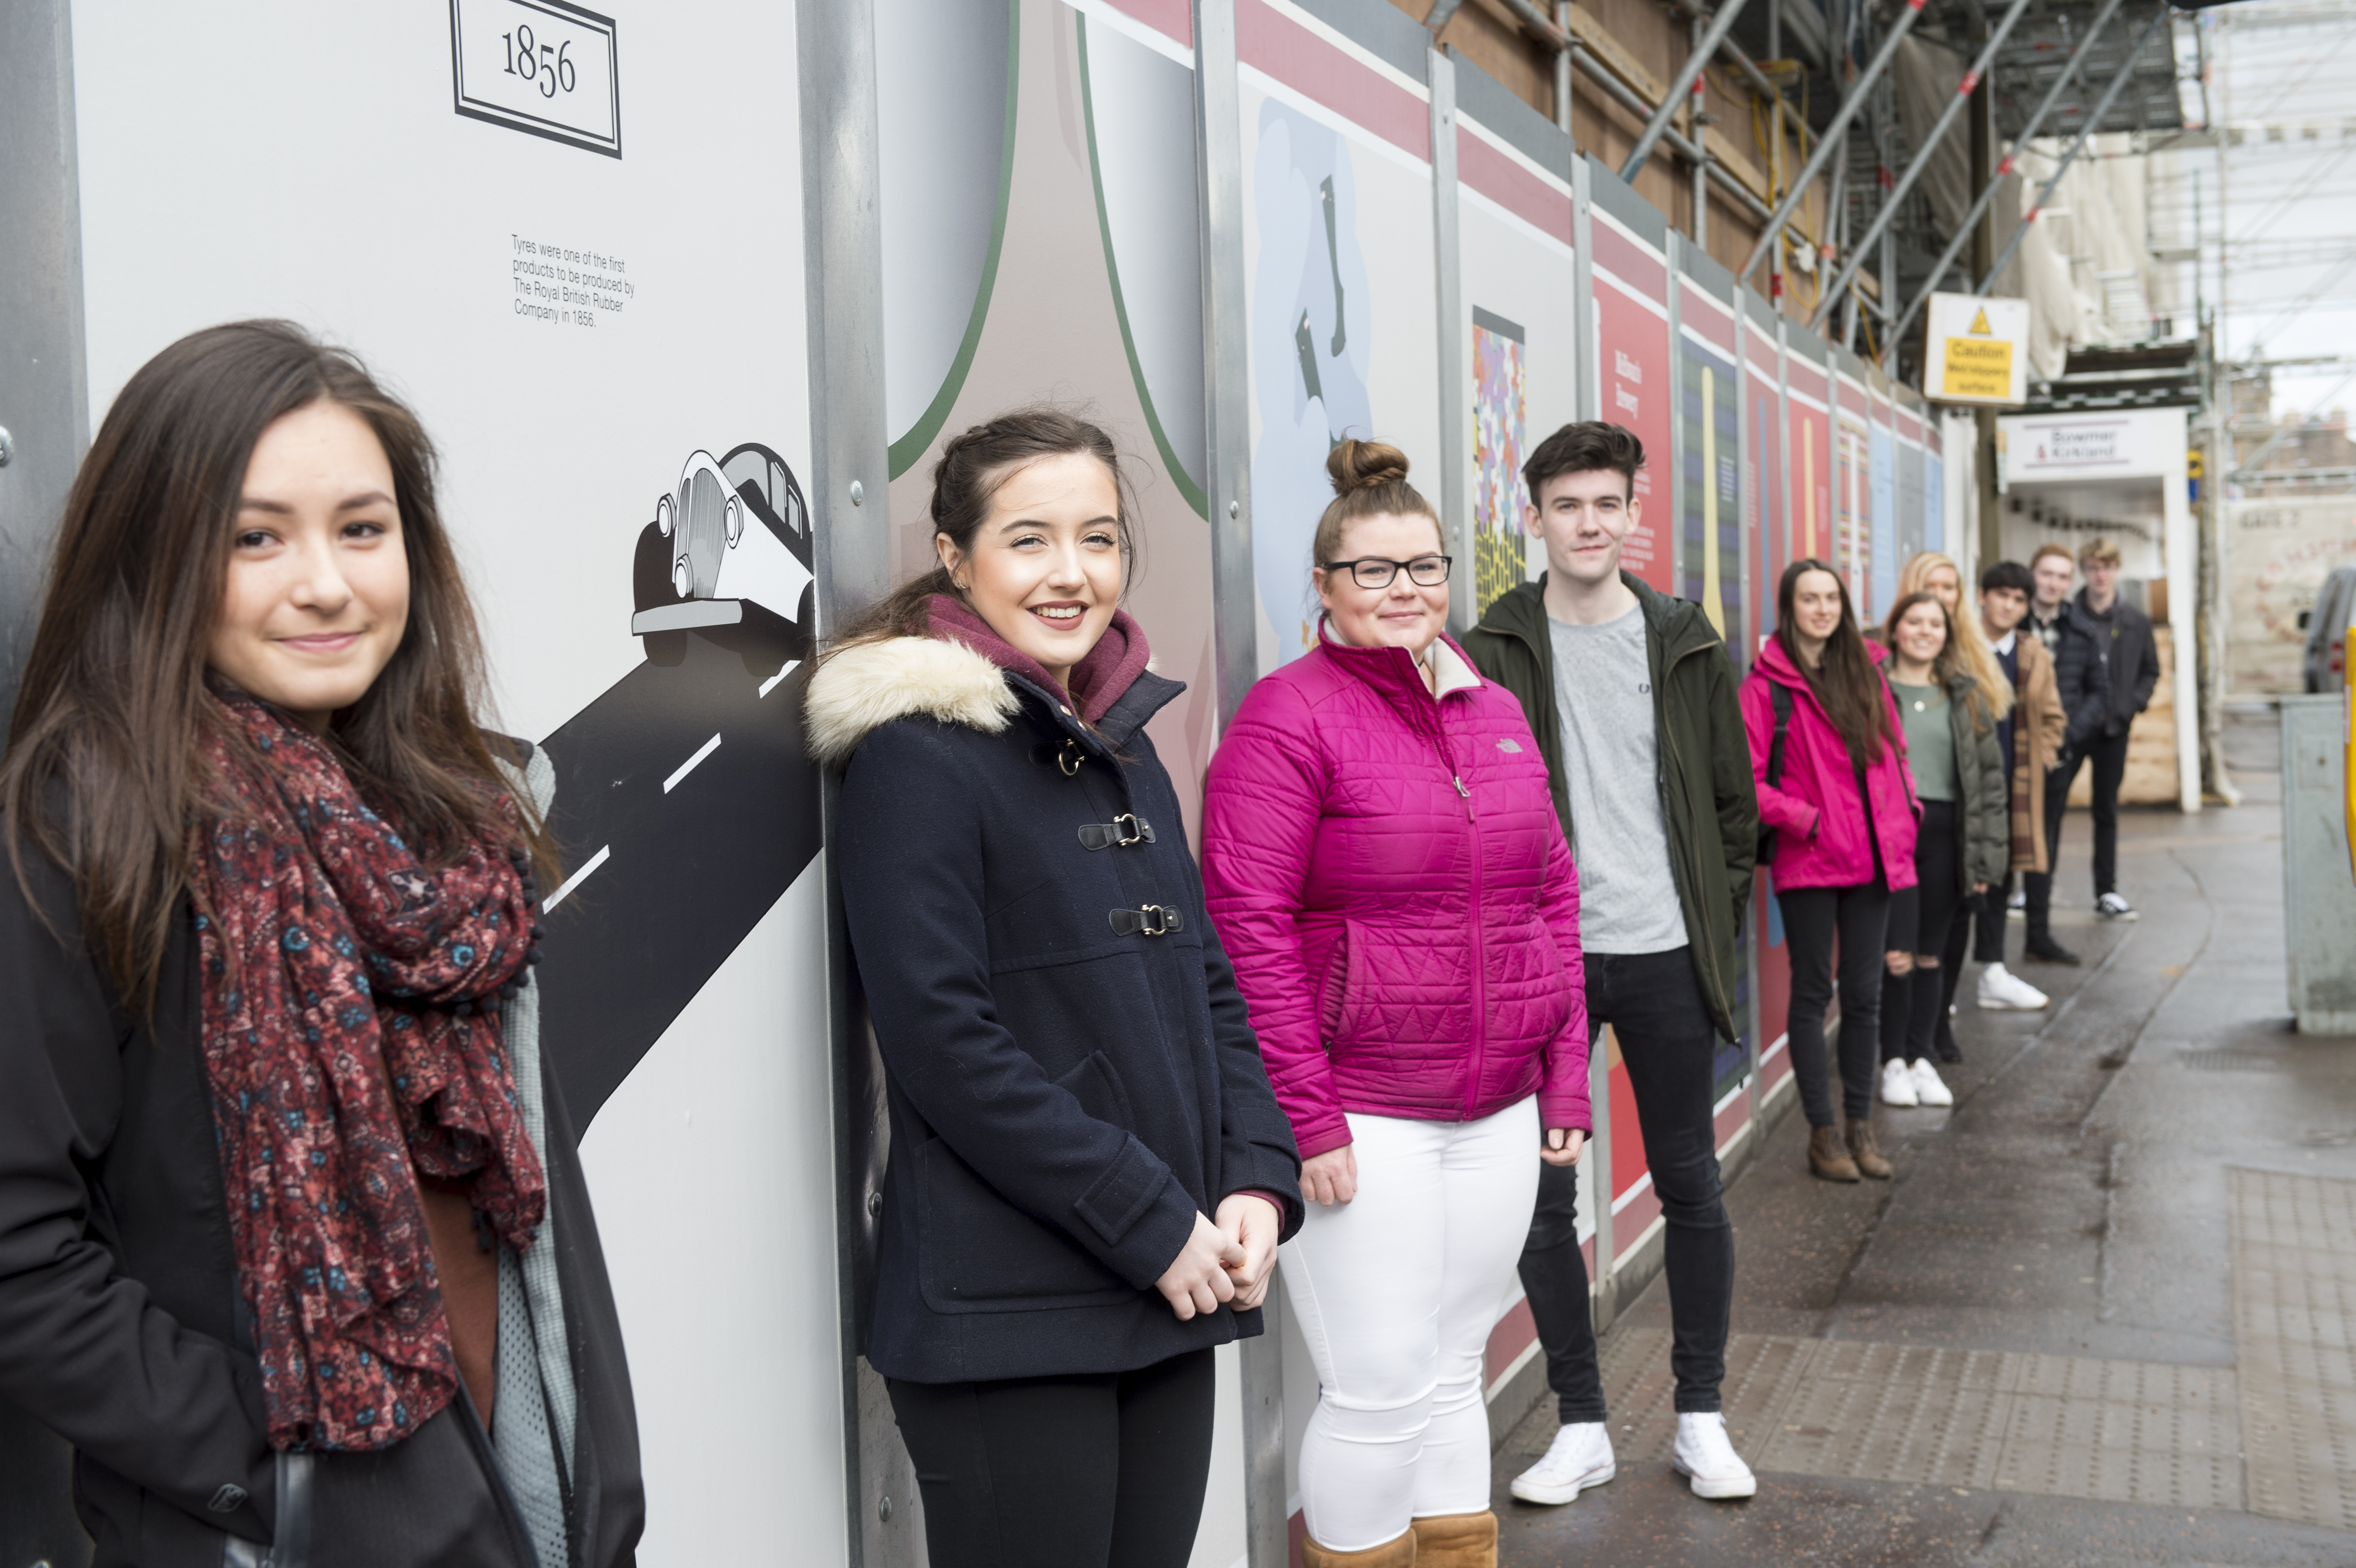 Edinburgh students give building new lease of life